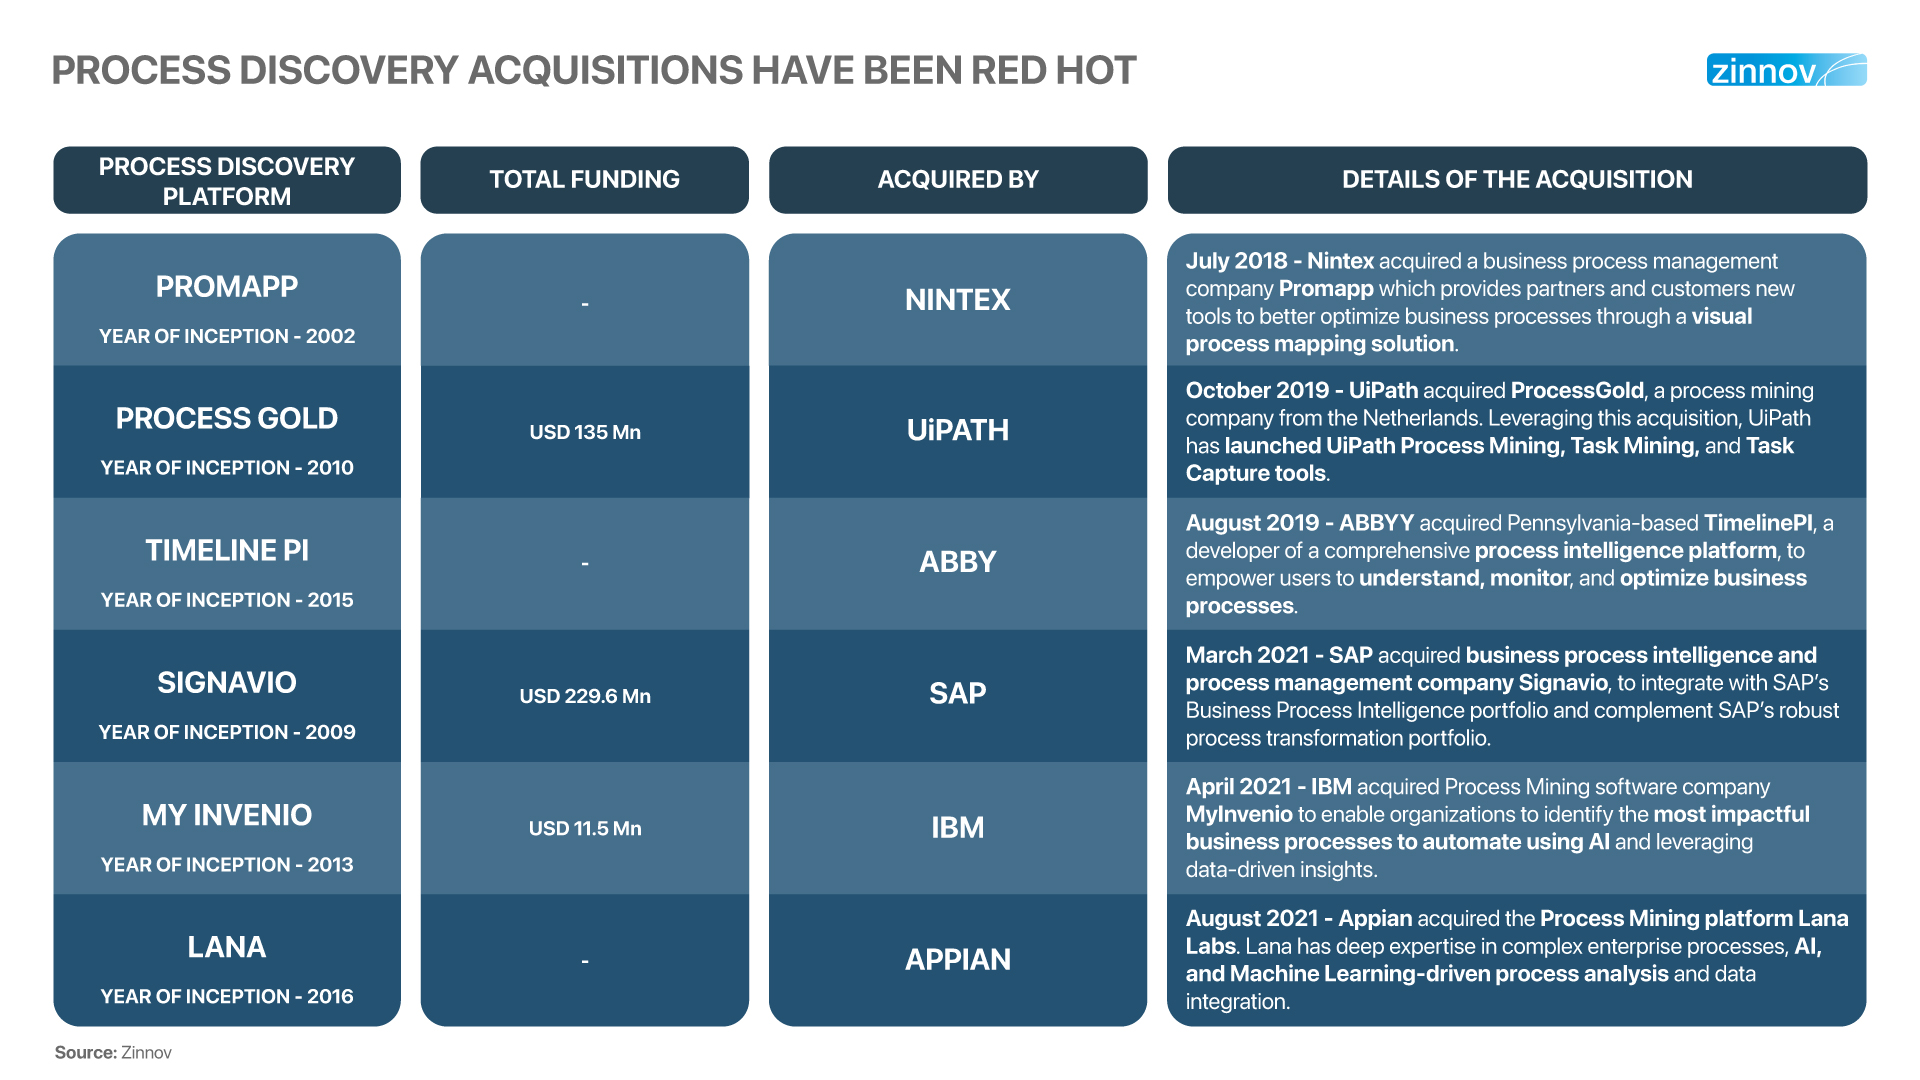 Process Discovery acquisition have been red hot